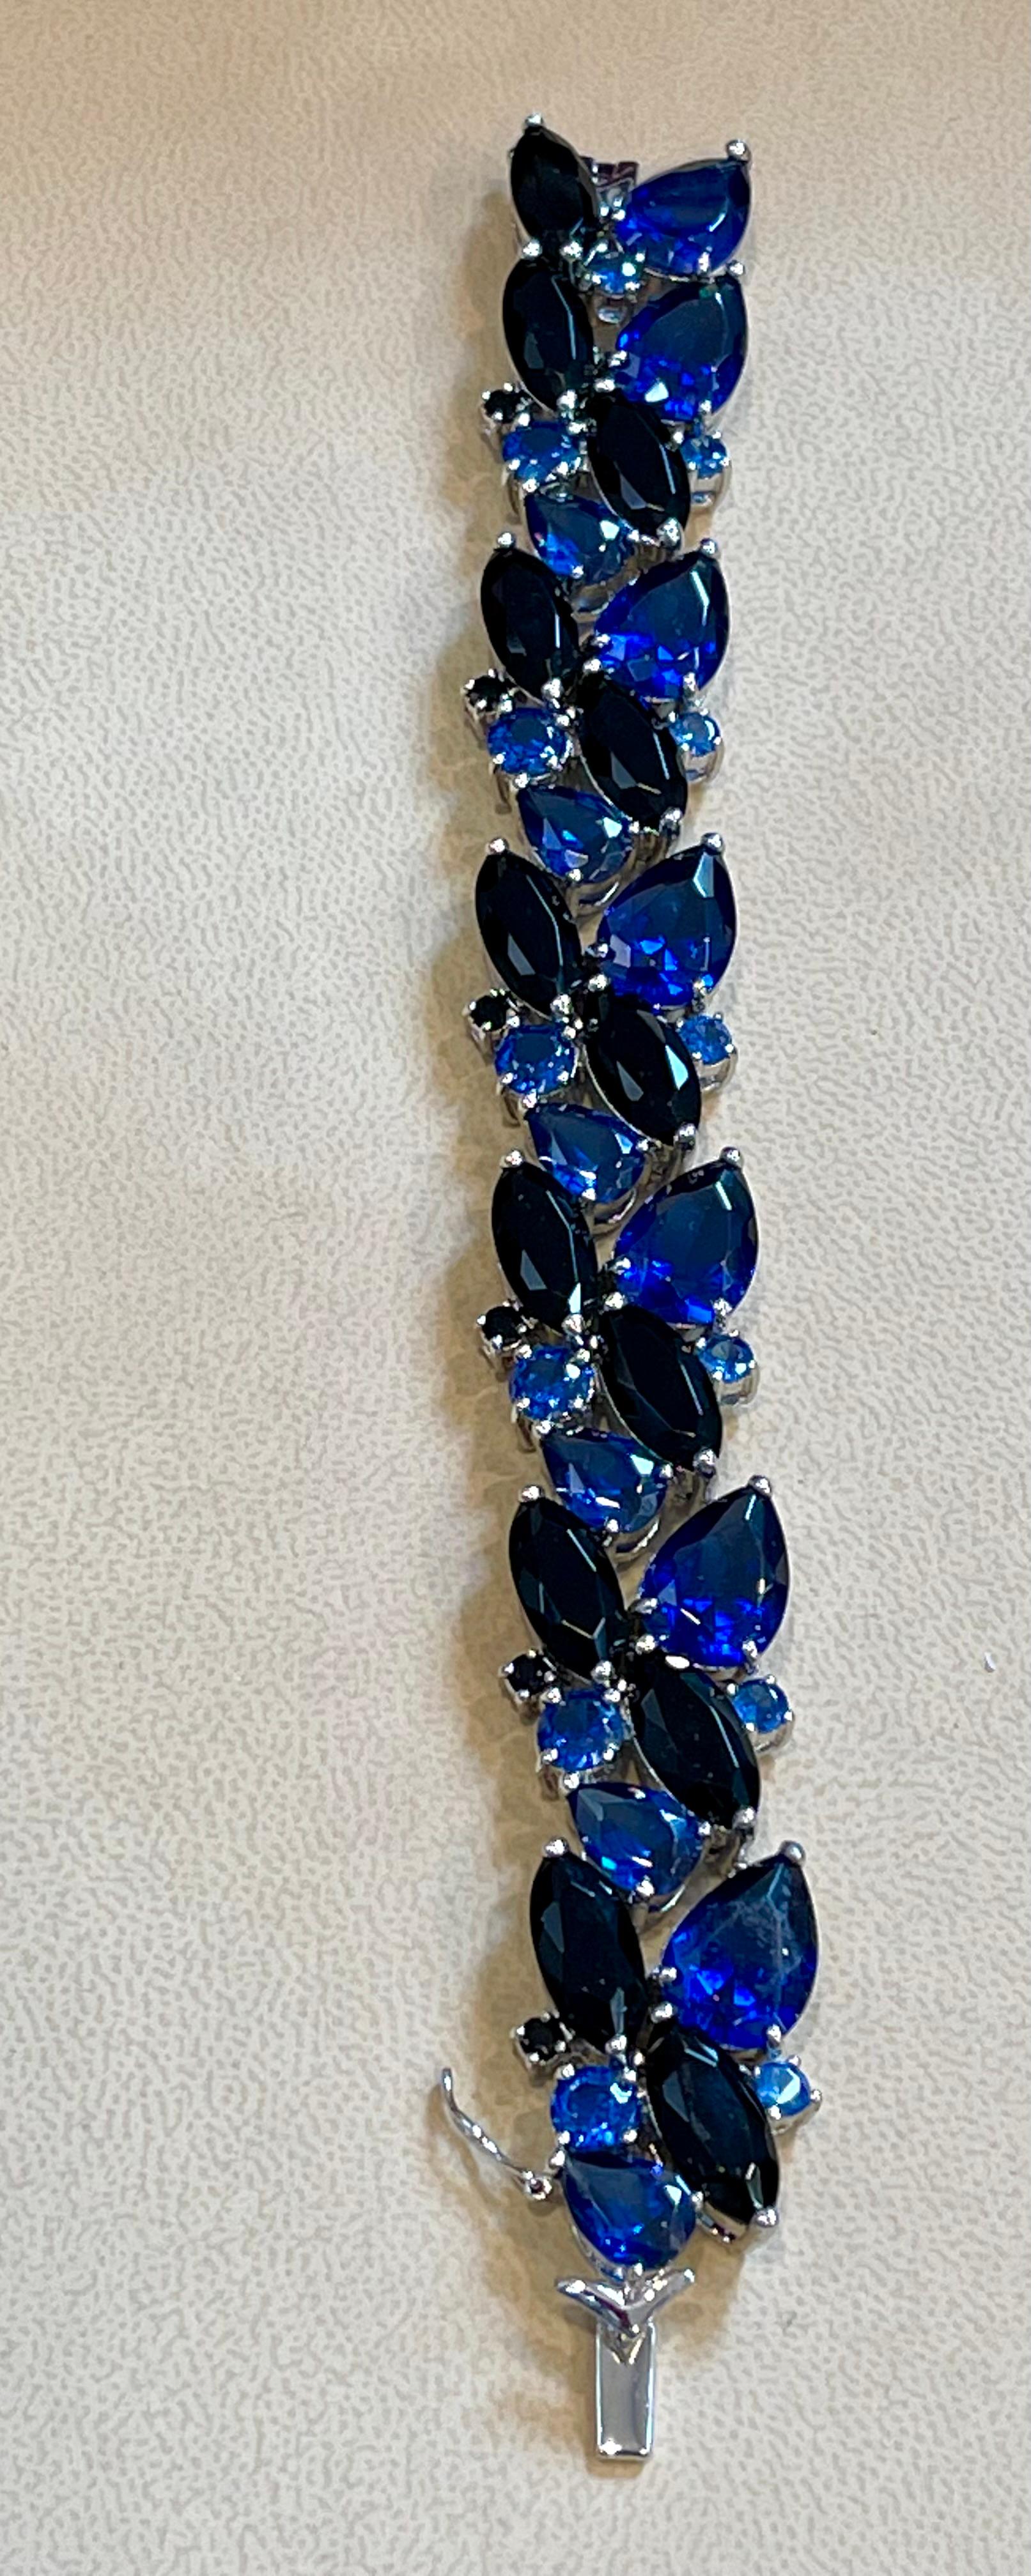  Cubic Zirconia or CZ is the cubic Crystalline form Of Zirconium dioxide. Its Hard and Usually  colorless.
This Bracelet is  amazing . Just looks like real blue sapphires
Pure sterling silver which will not tarnish over time.
7.5 inch long
Each blue